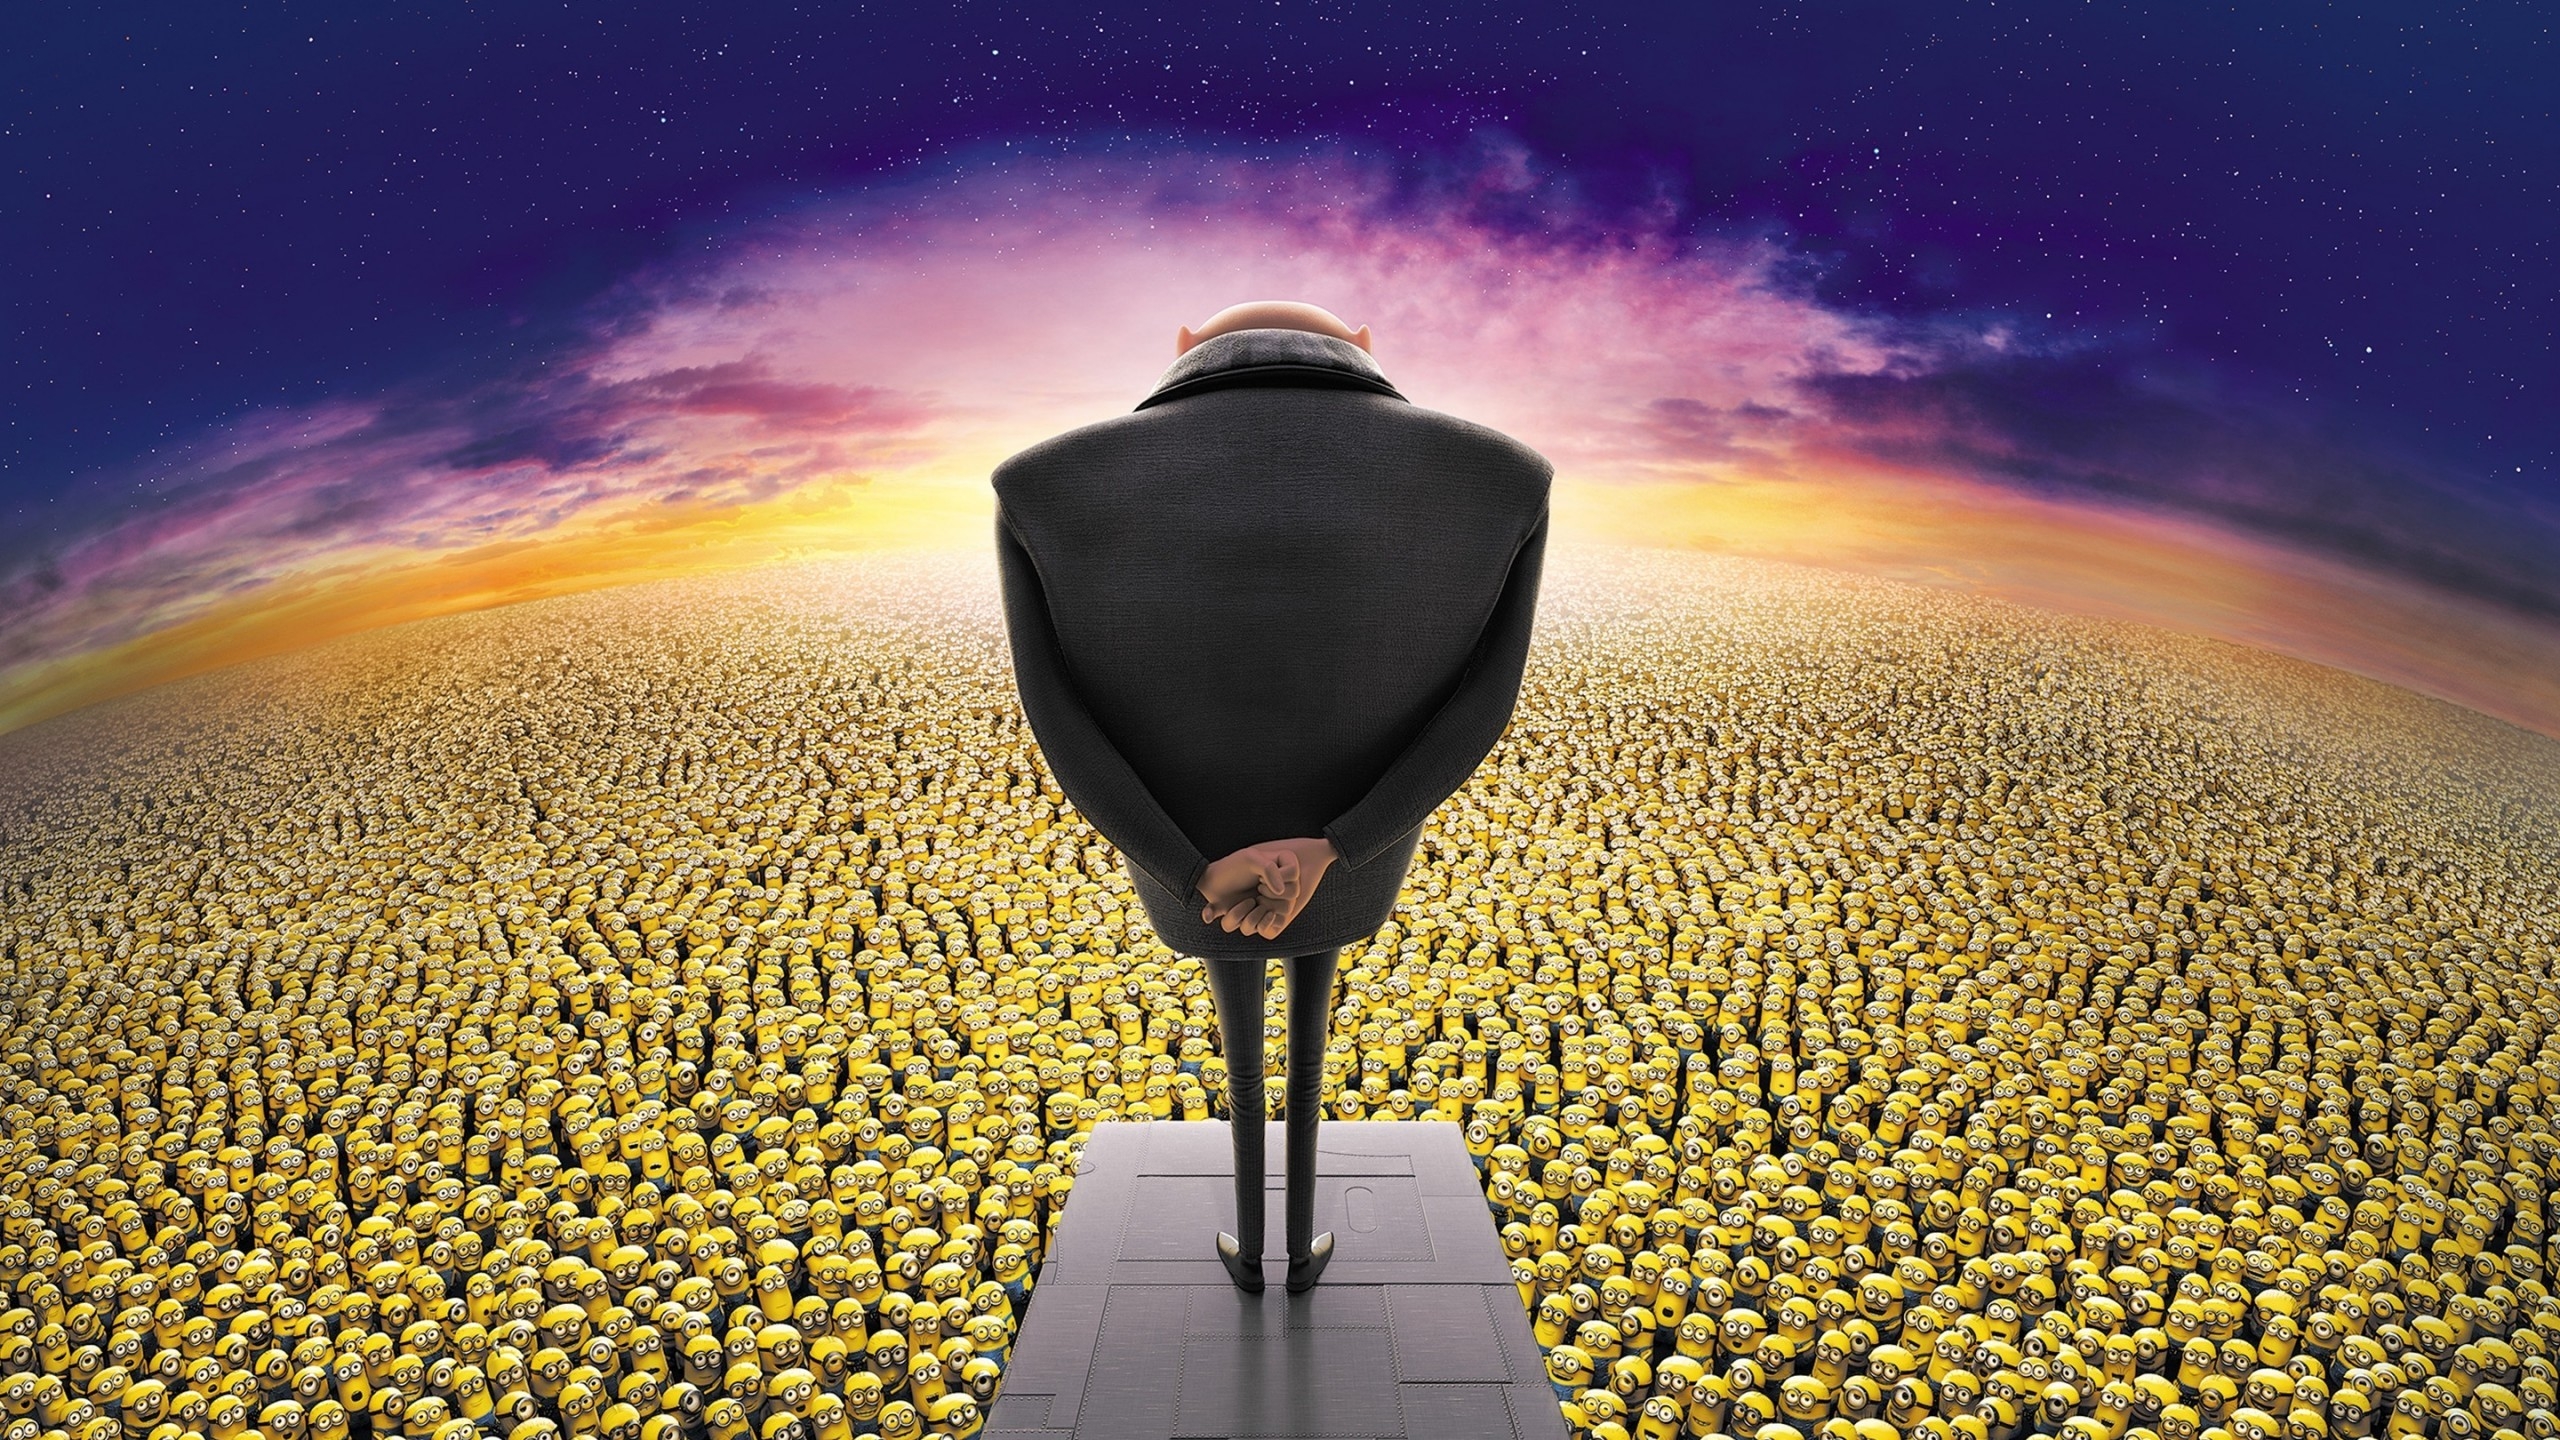 Despicable Me 2 Film for 2560x1440 HDTV resolution